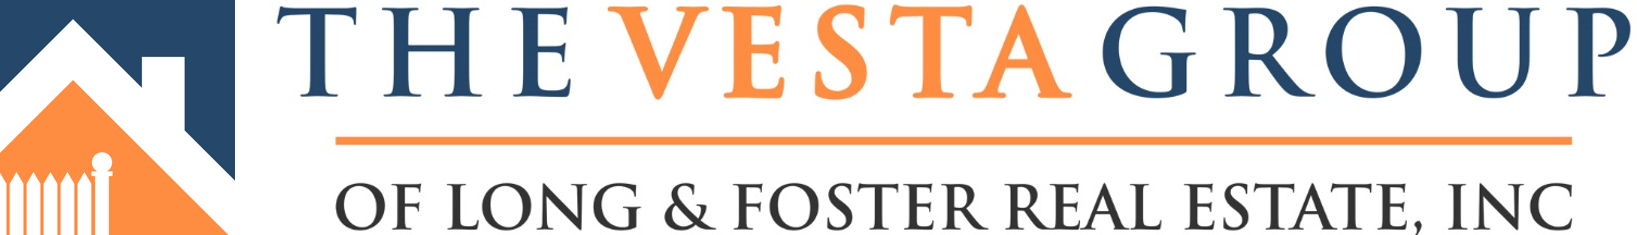 The Vesta Group of Long & Foster Real Estate.